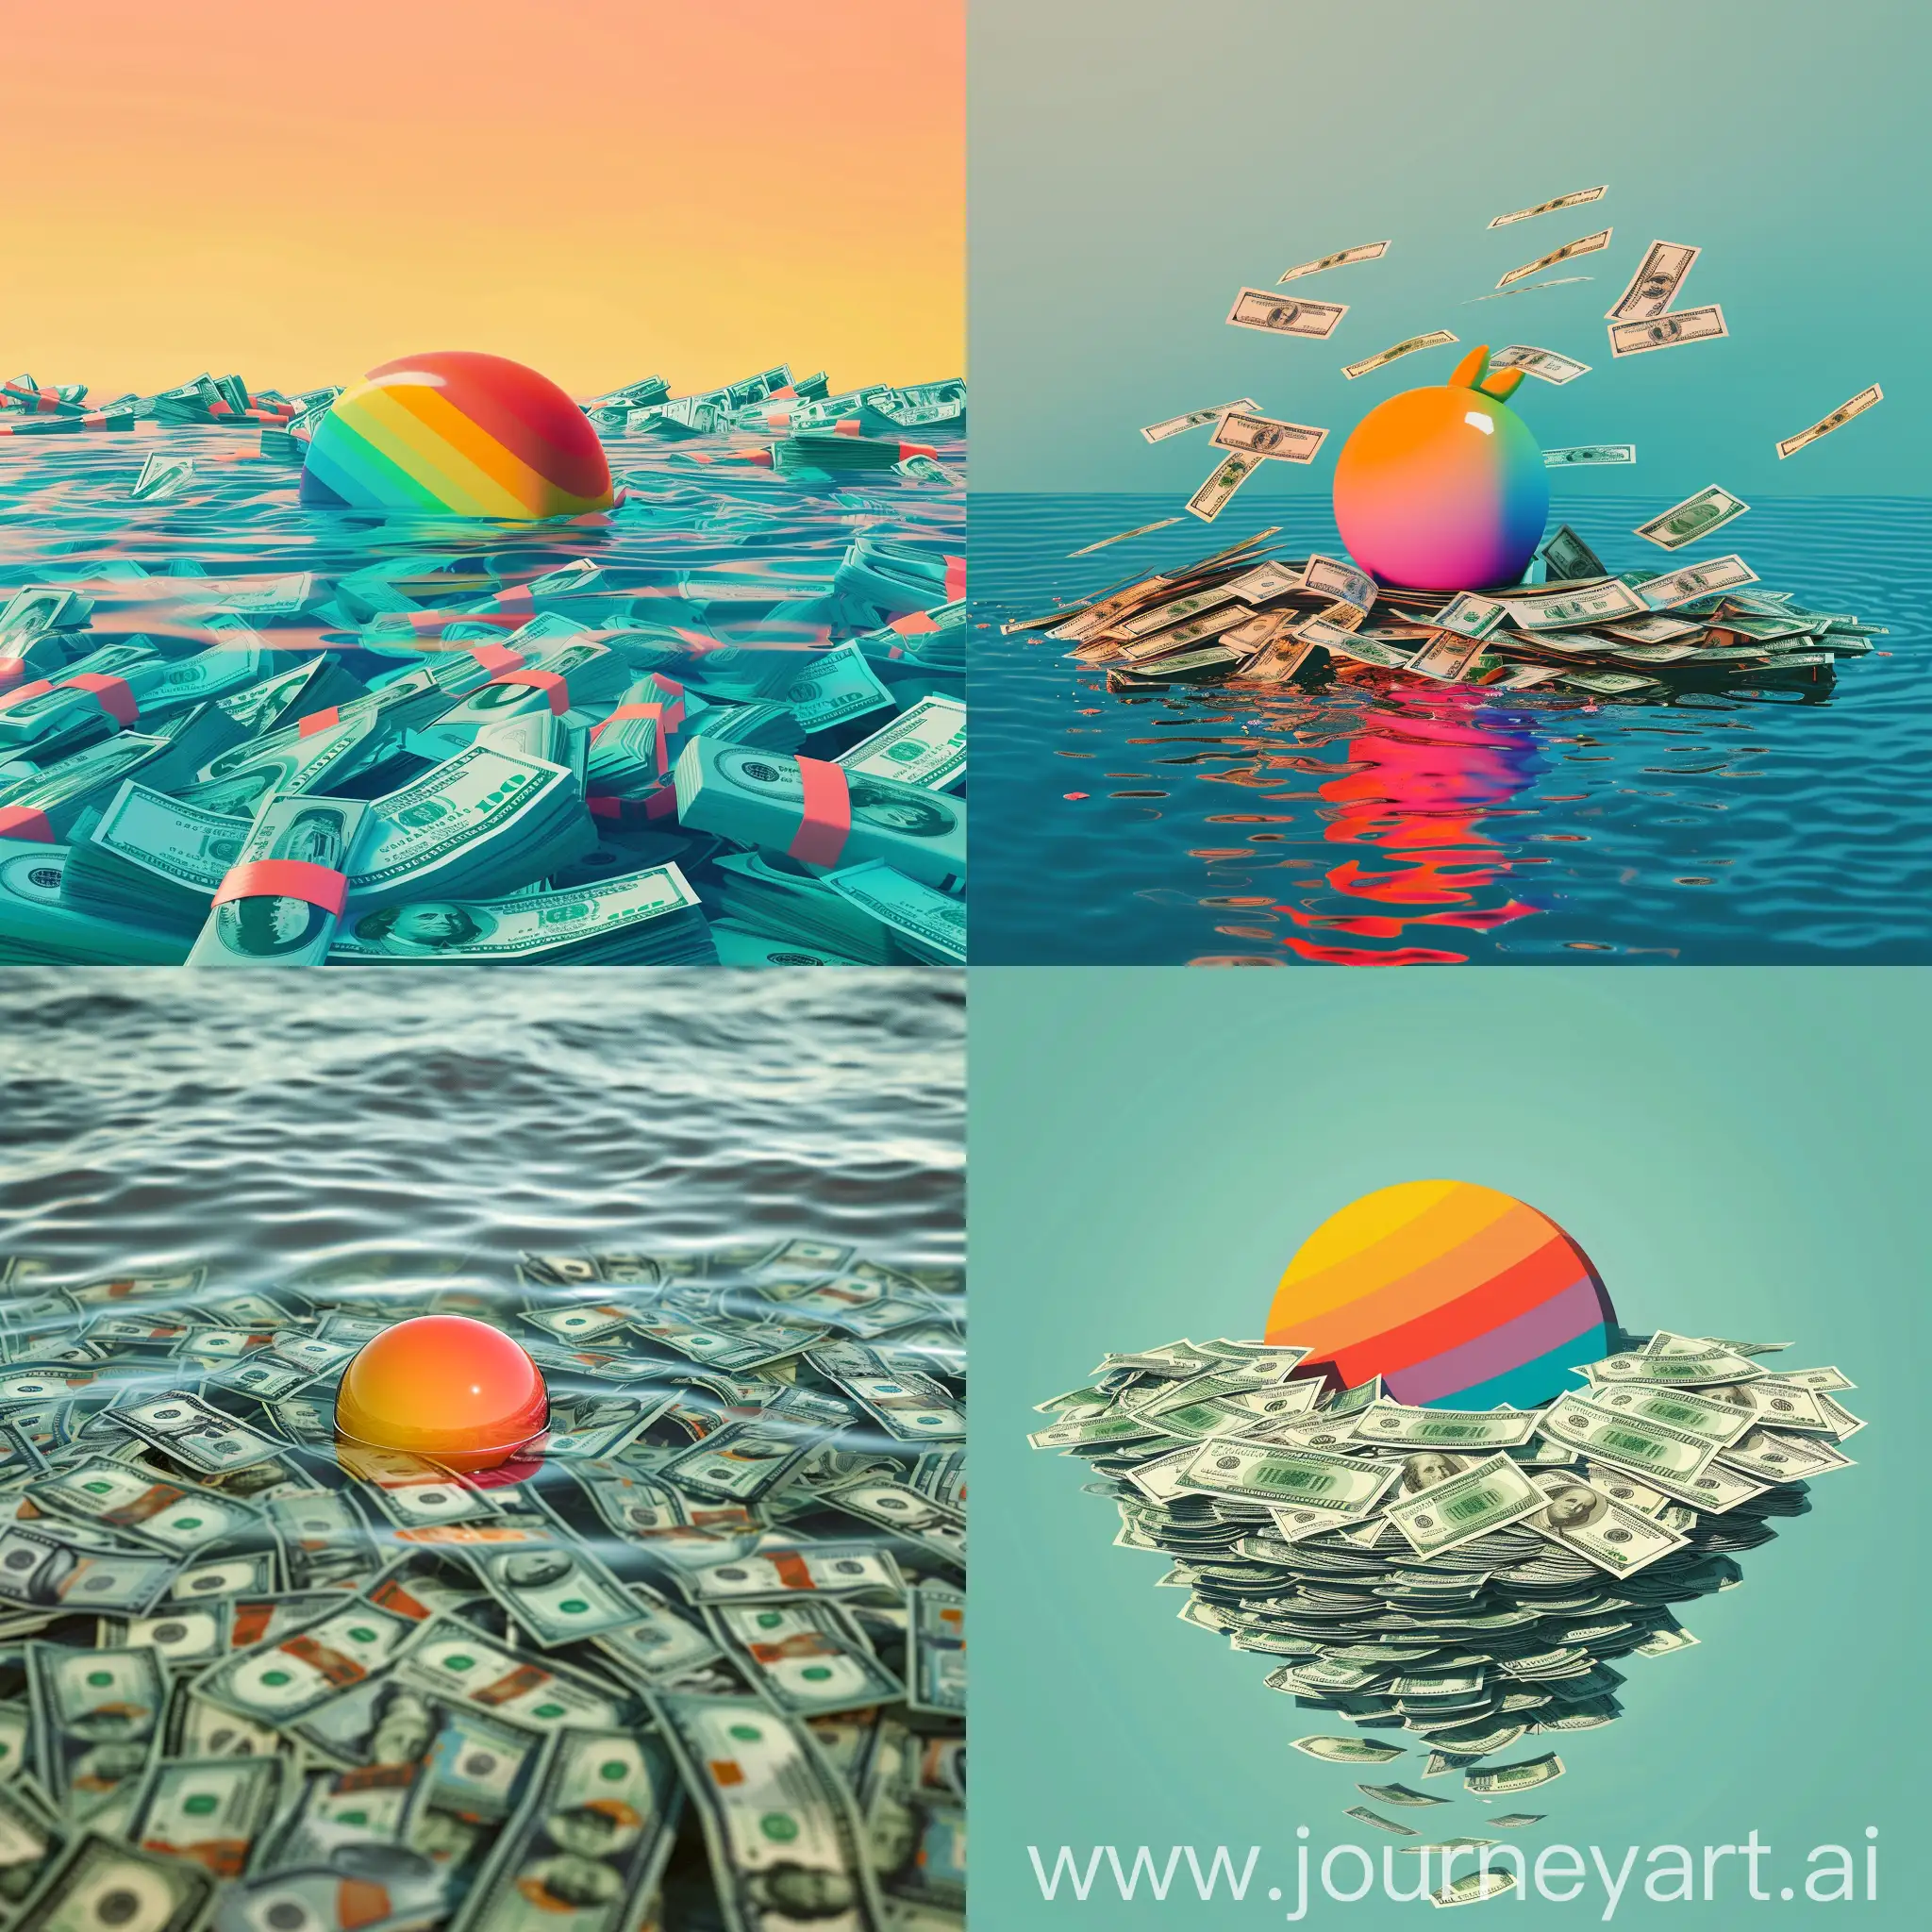 a gradient symbol swimming in a pool of money, photorealistic